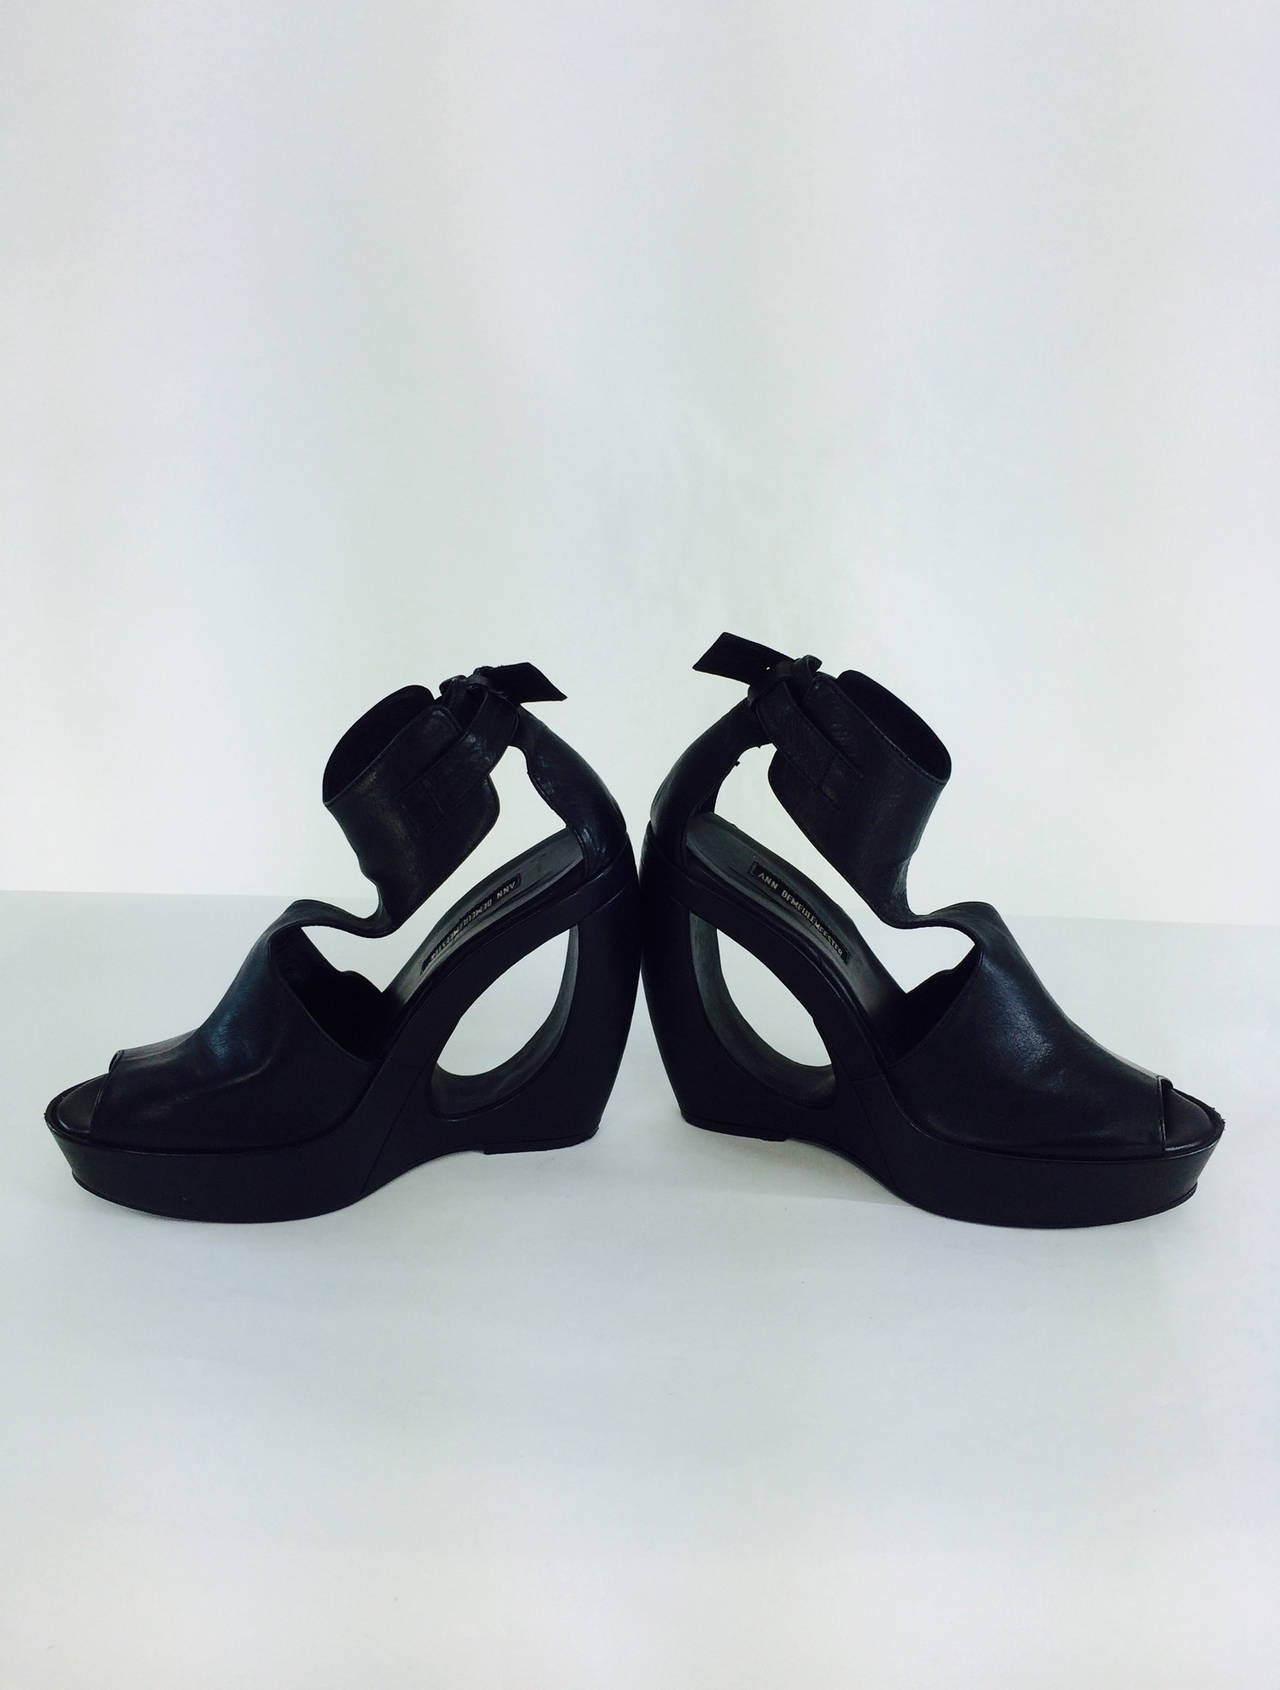 Ann Demeulemeester black leather cut out wedge platform shoes, with buckles at the ankles...Soft black leather with molded shape heel covered in black leather...Marked size 39, in very good barely worn condition...